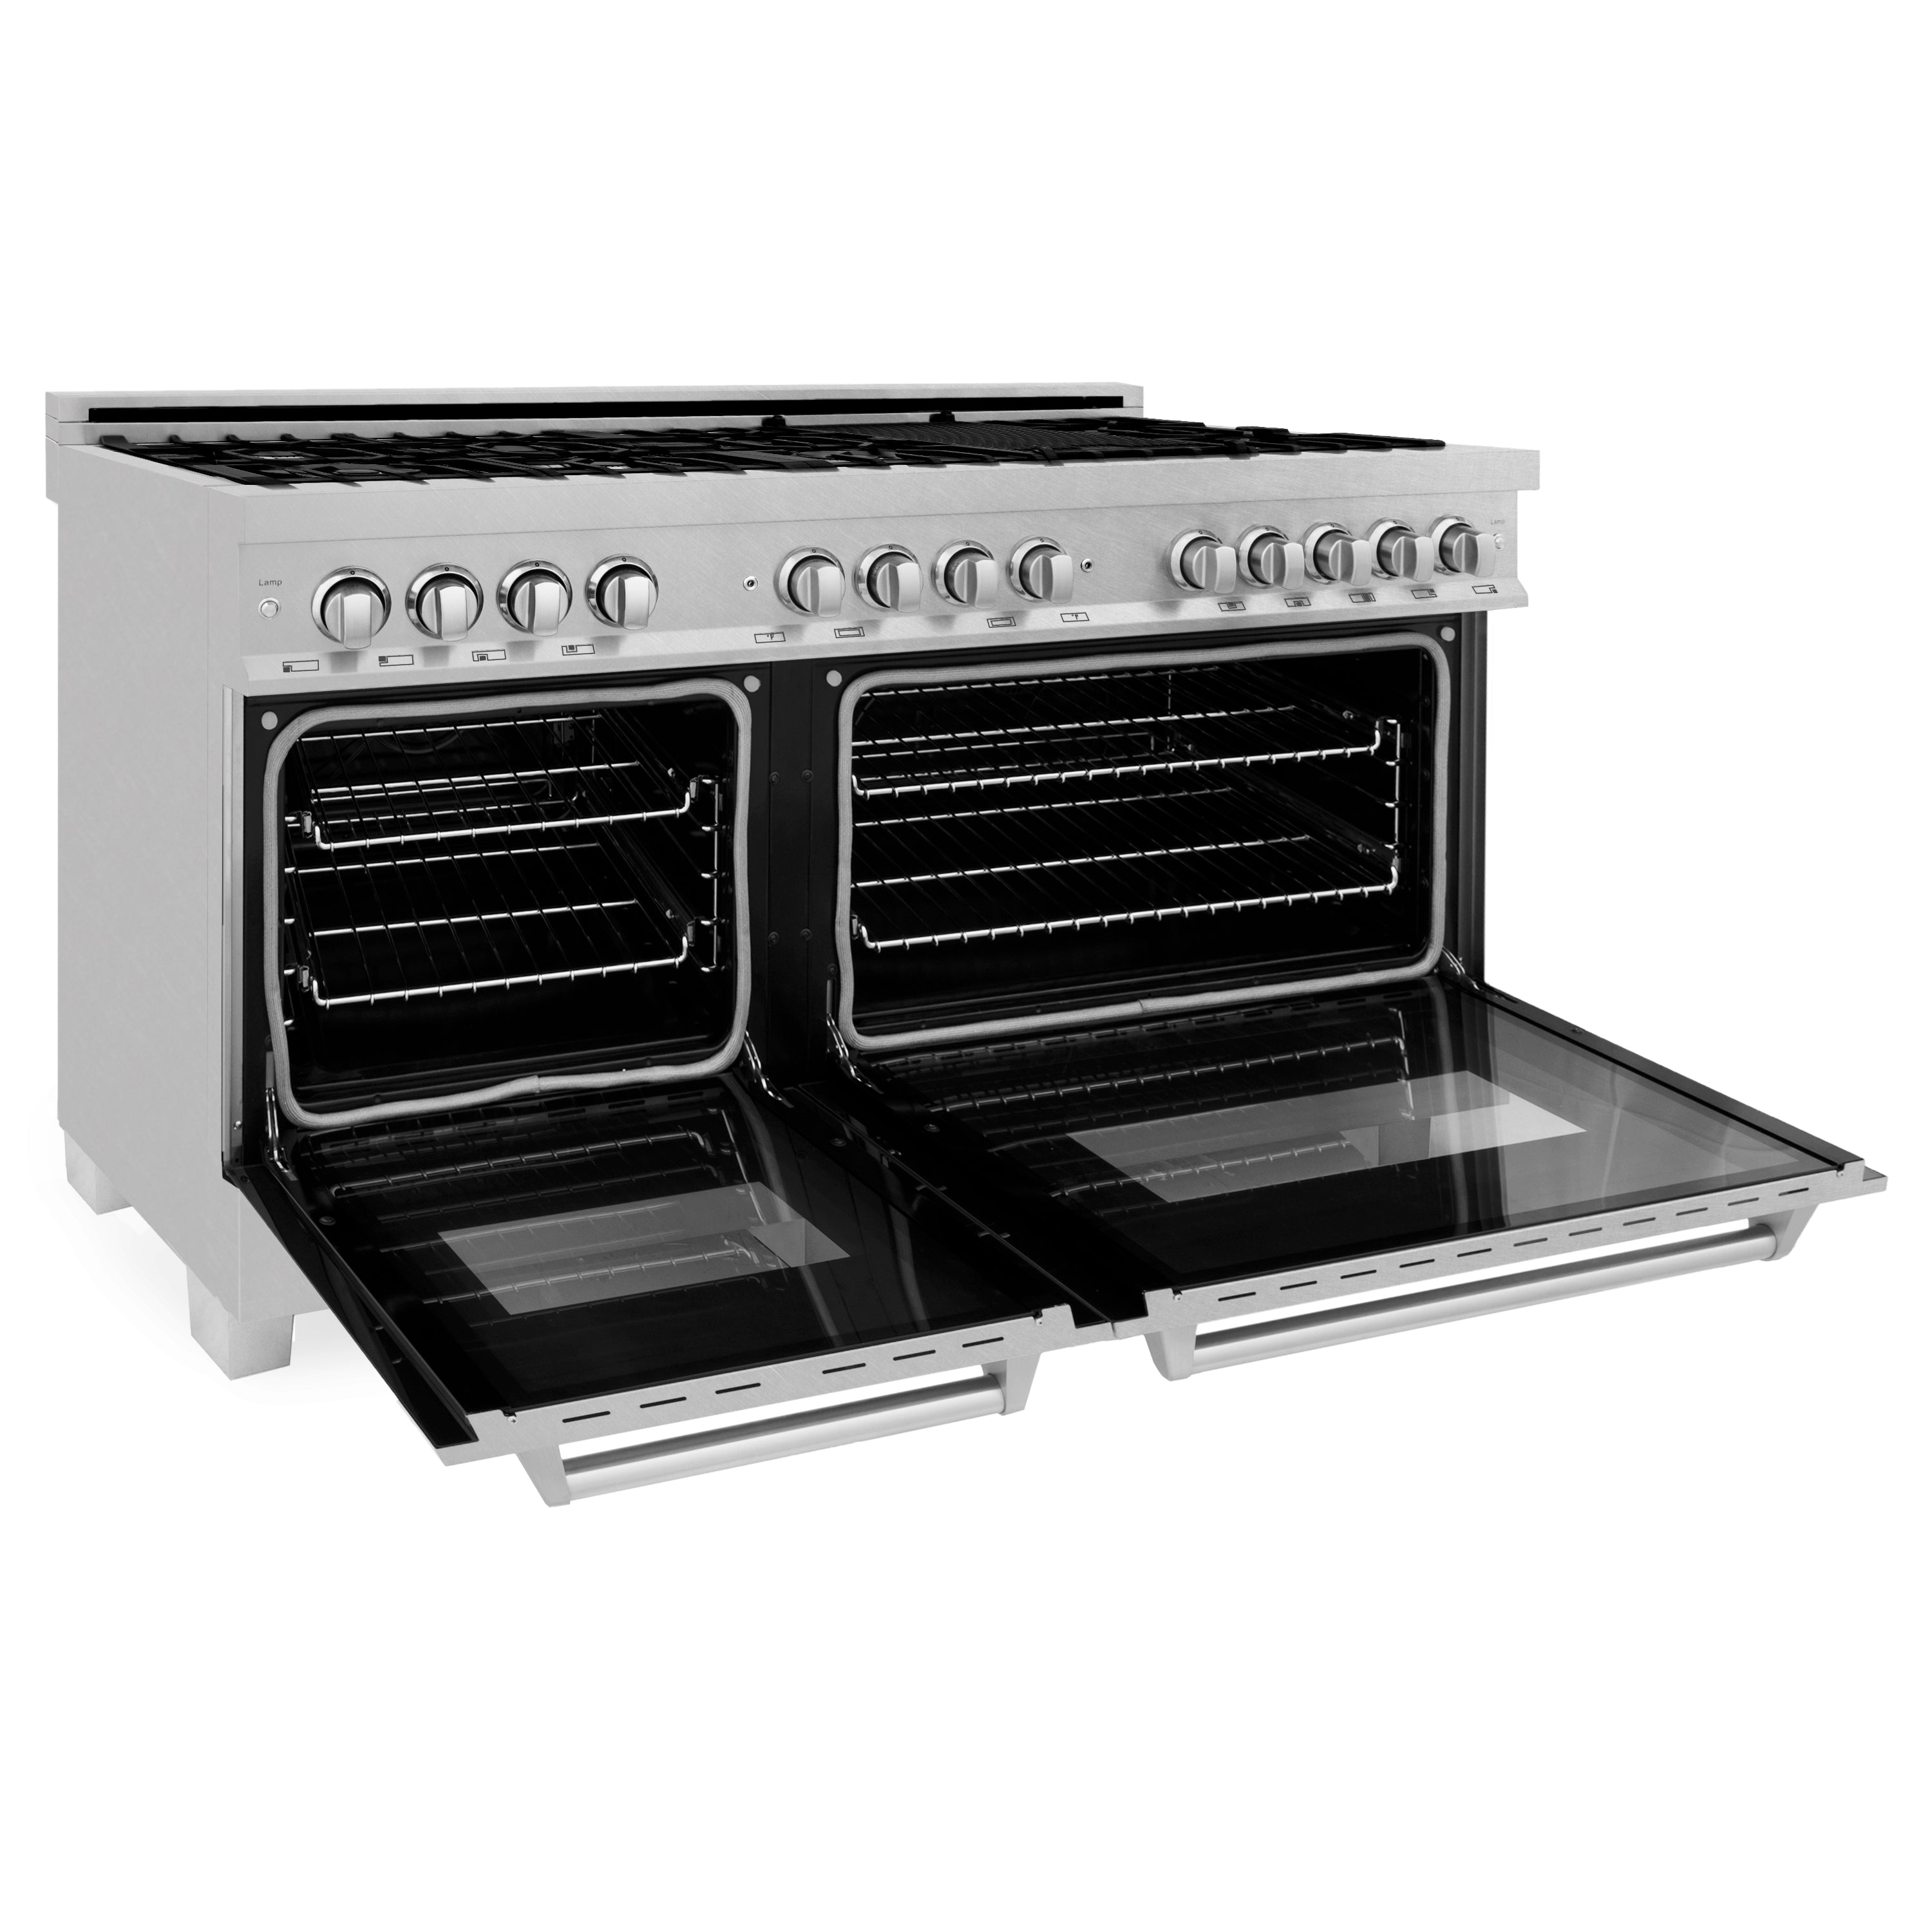 ZLINE 60" 7.4 cu. ft. Dual Fuel Range with Gas Stove and Electric Oven in Fingerprint Resistant Stainless Steel (RAS-SN-60)